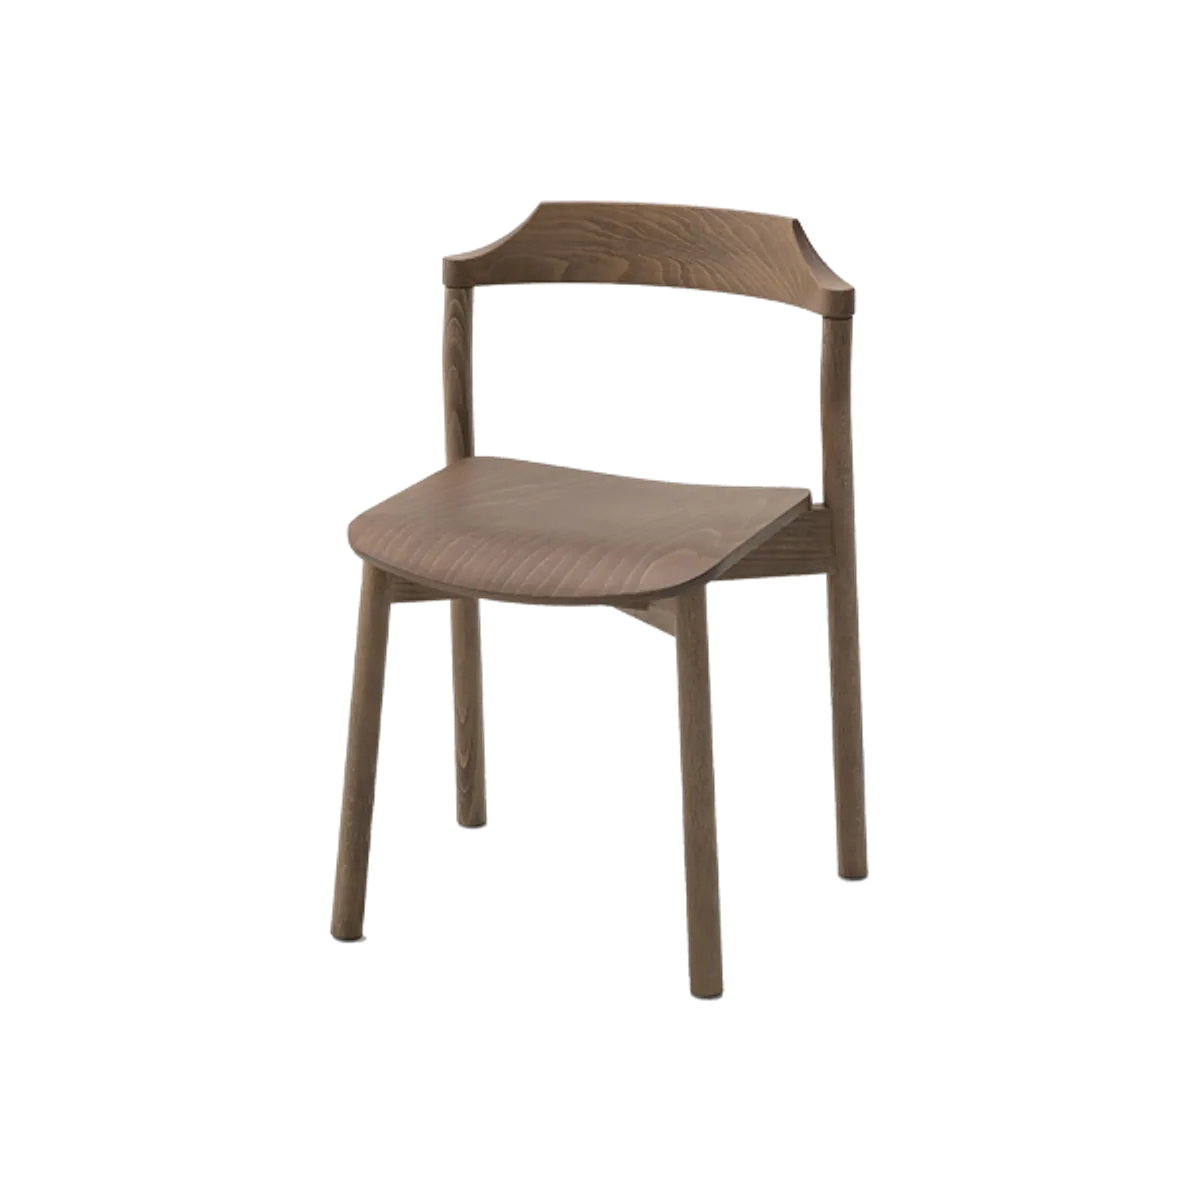 Yumi Side Chair Inside Out Contract